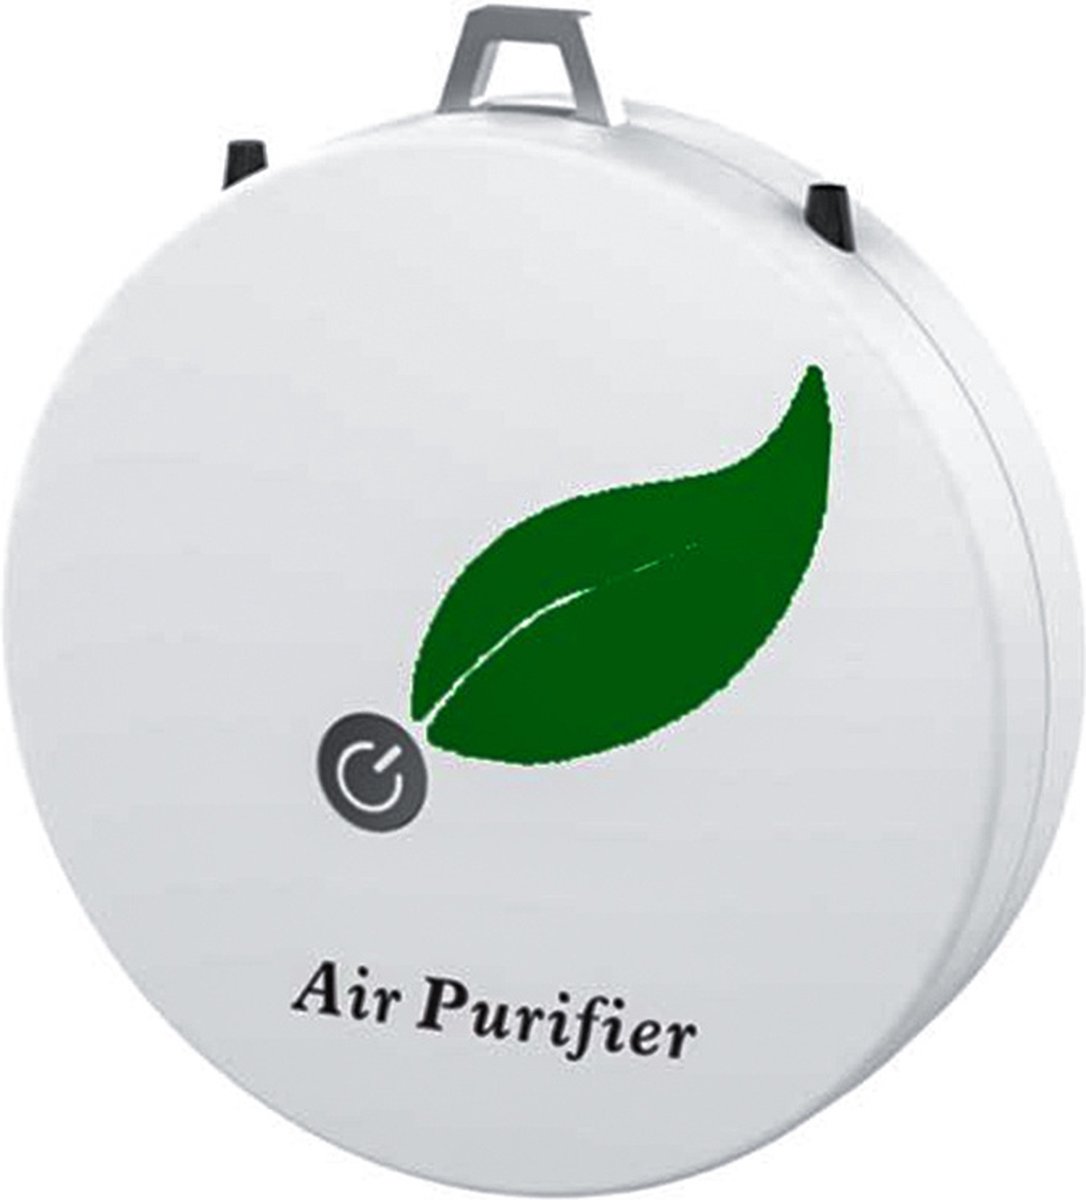 Air Purifier Flu - Hay fever - Bacteria removal - air cleaner - Mini Draagbare Luchtreiniger - Luchtverfrisser - Ketting - Auto Accessoires